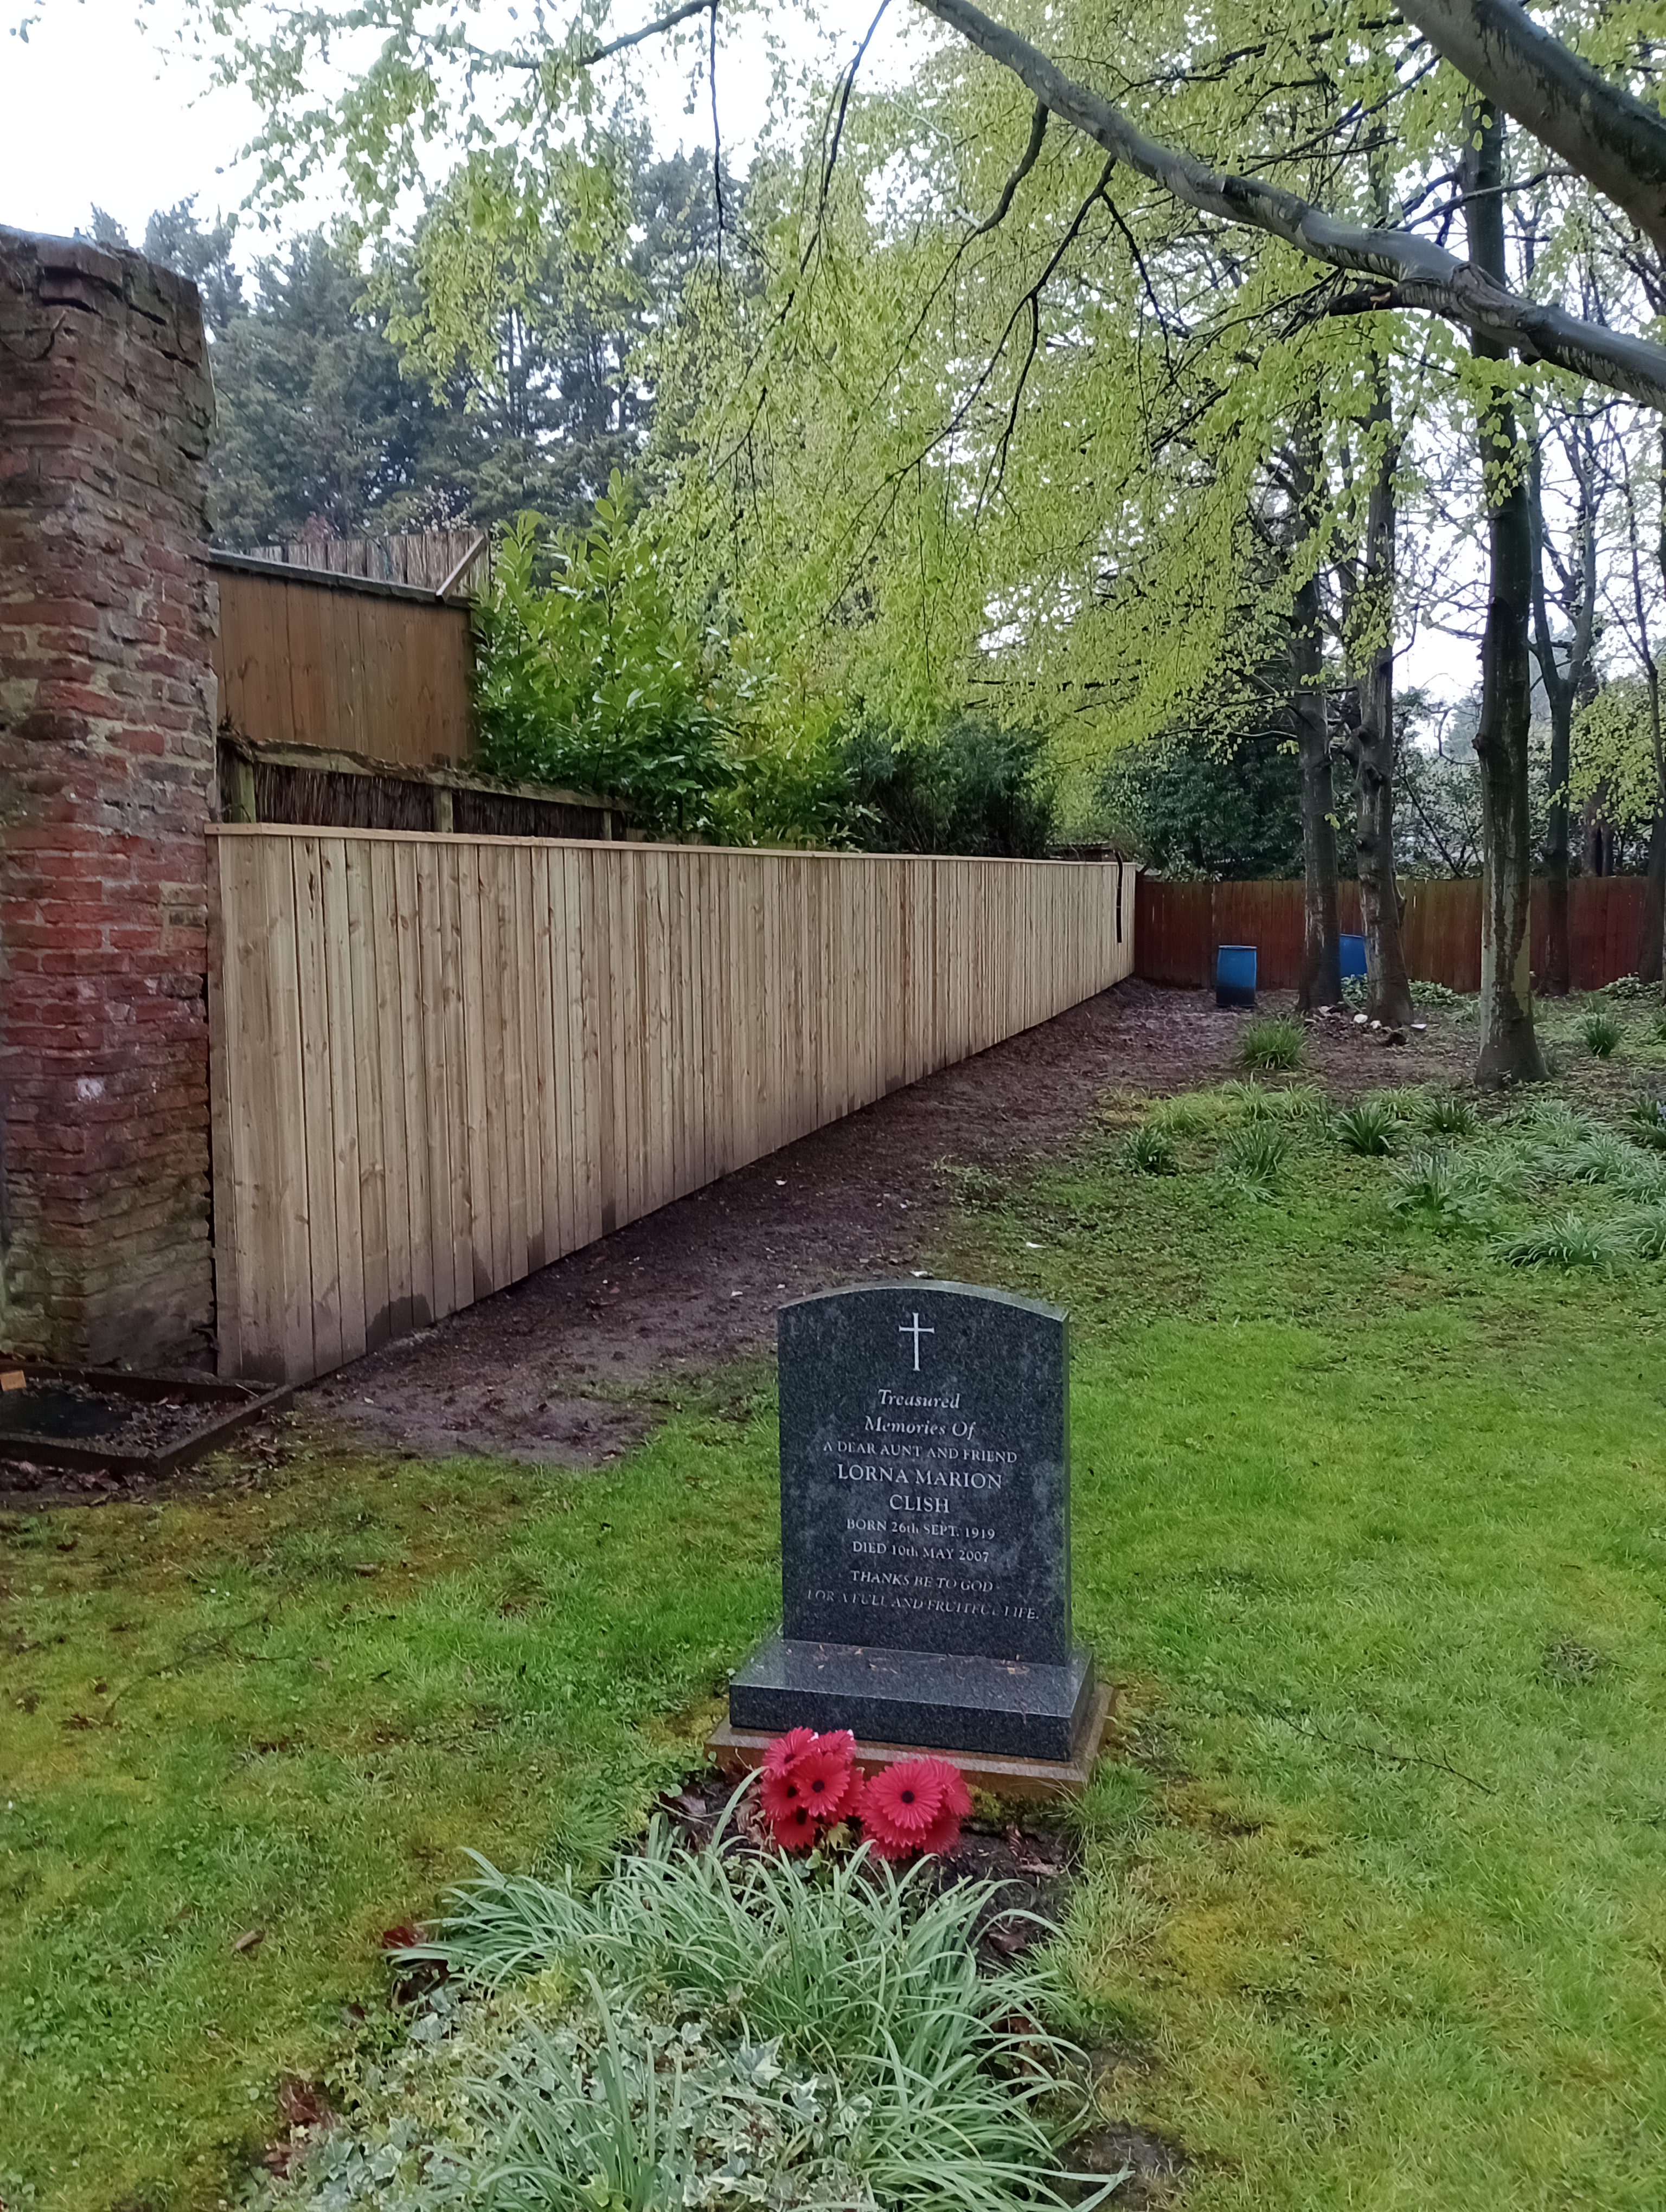 Photograph of fence on south boundary of churchyard